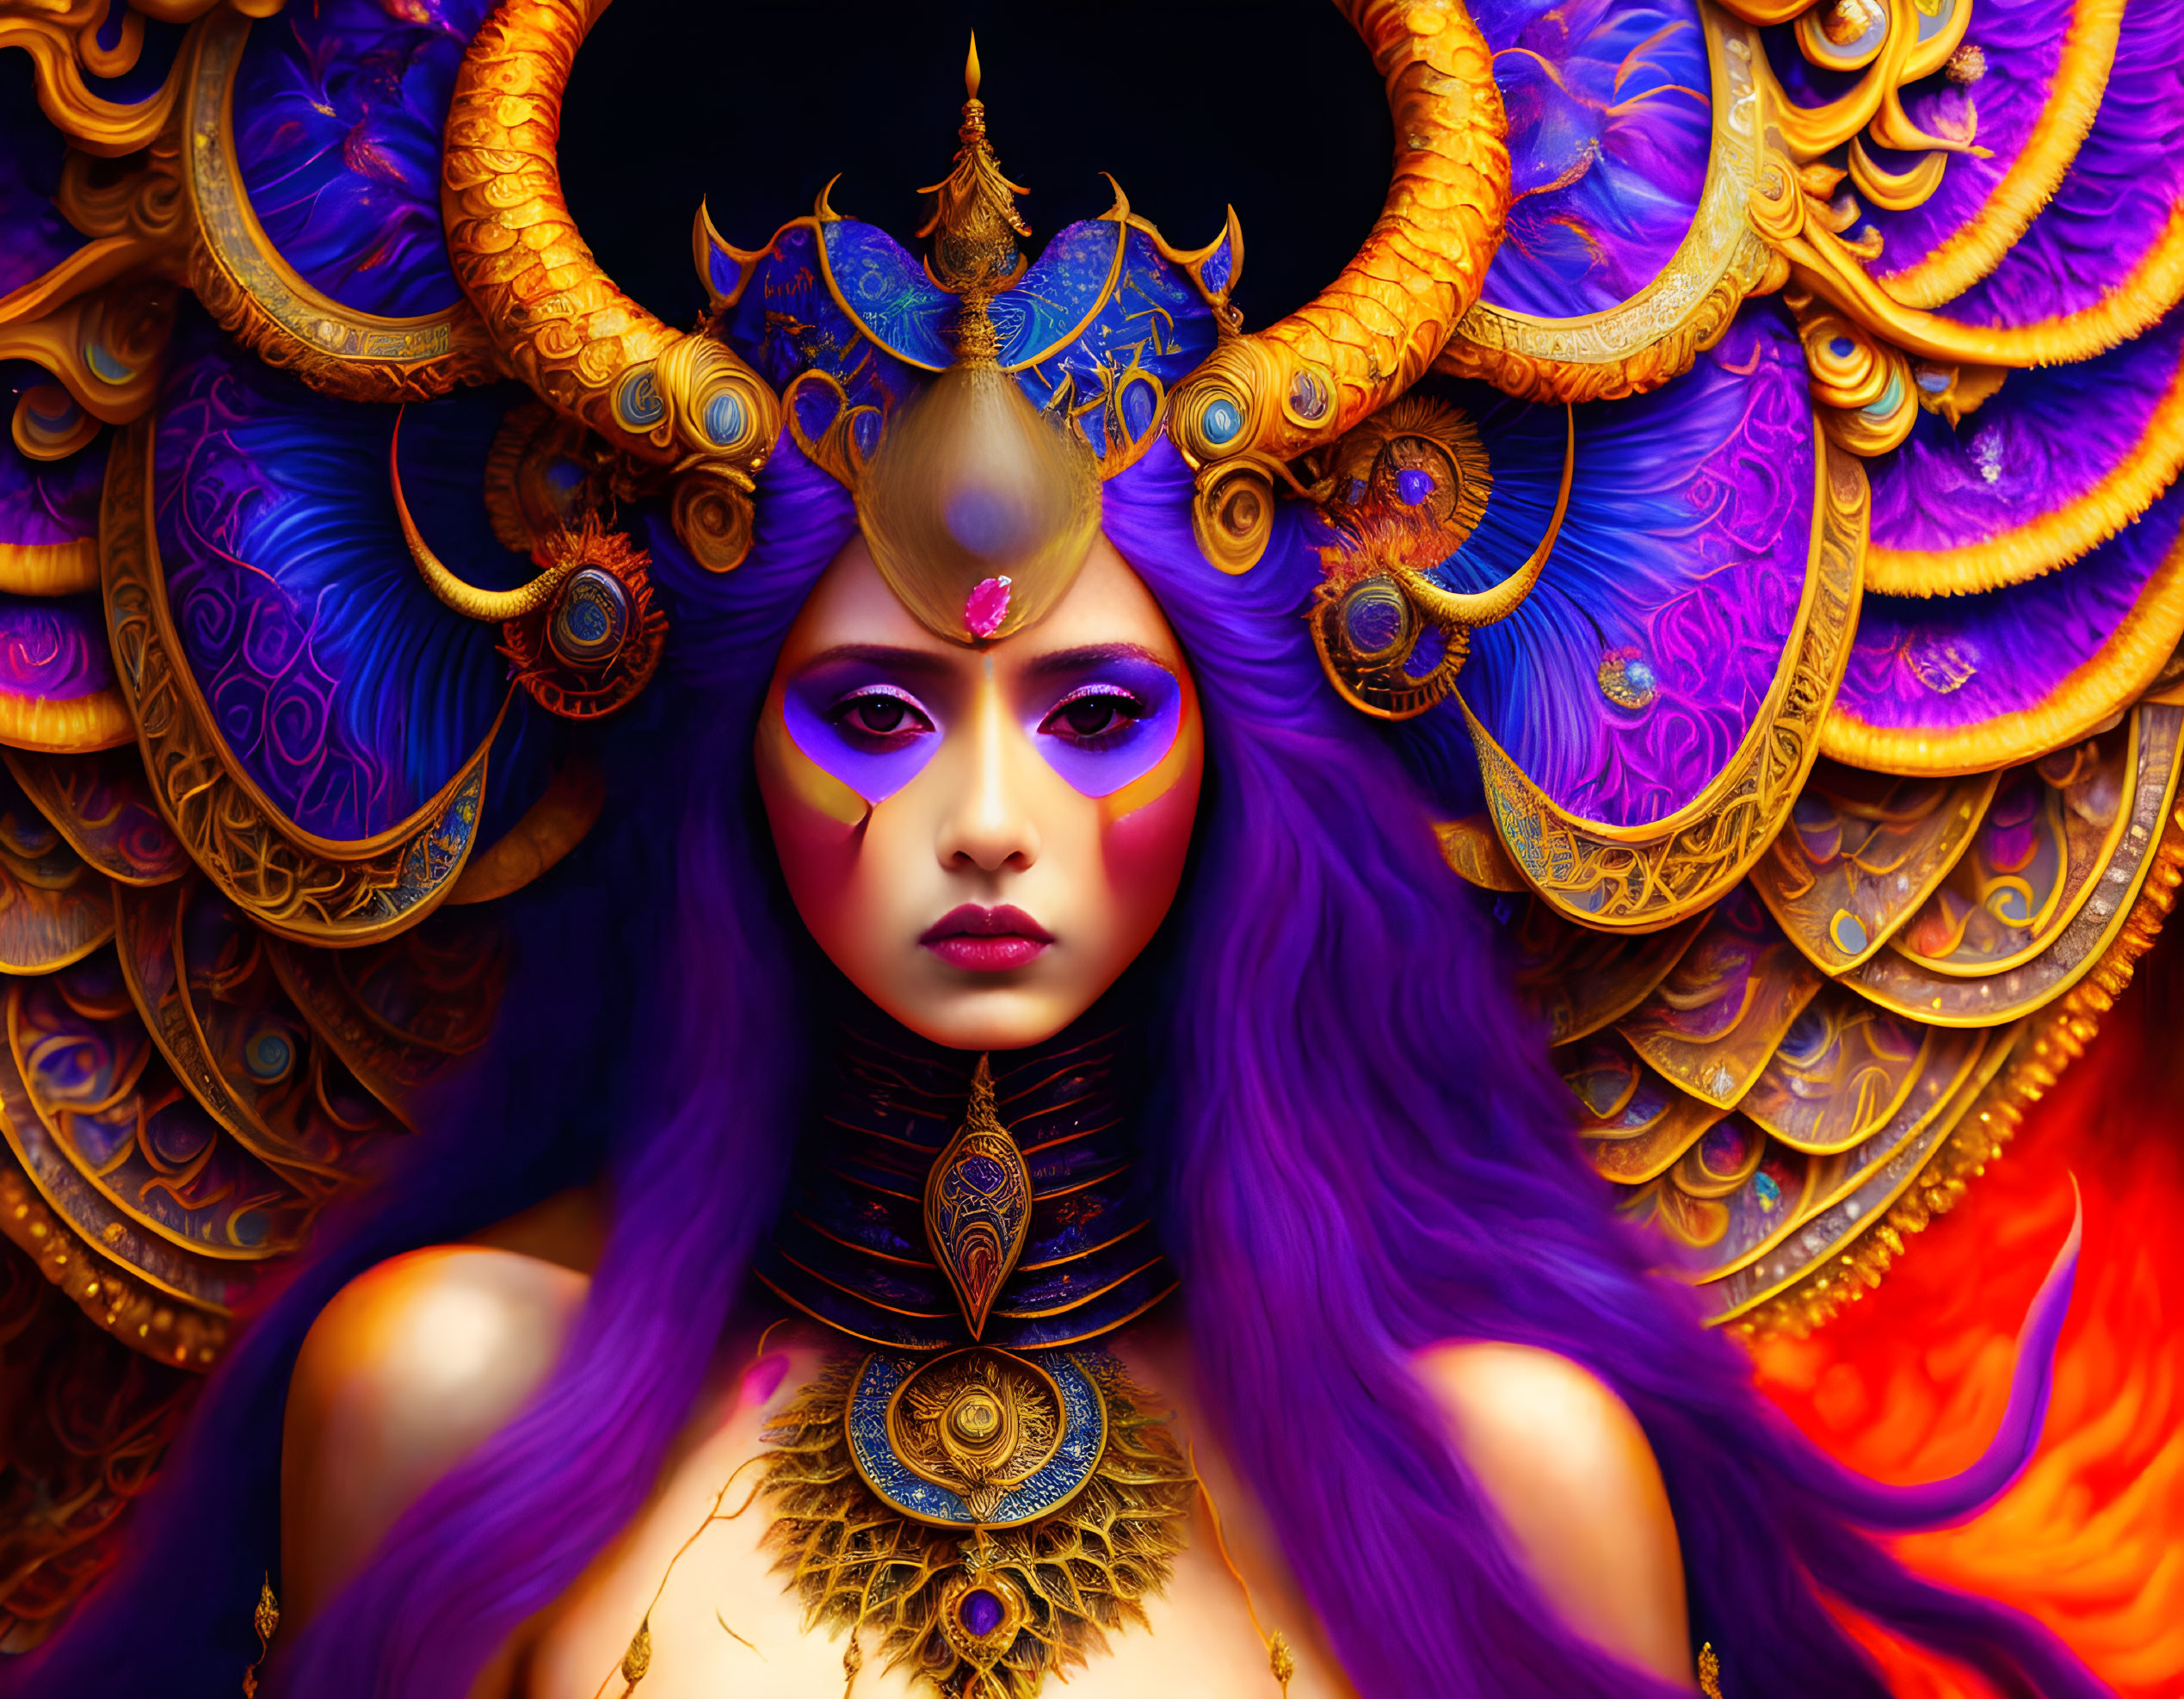 Colorful Artwork of Woman with Purple Skin and Golden Accessories